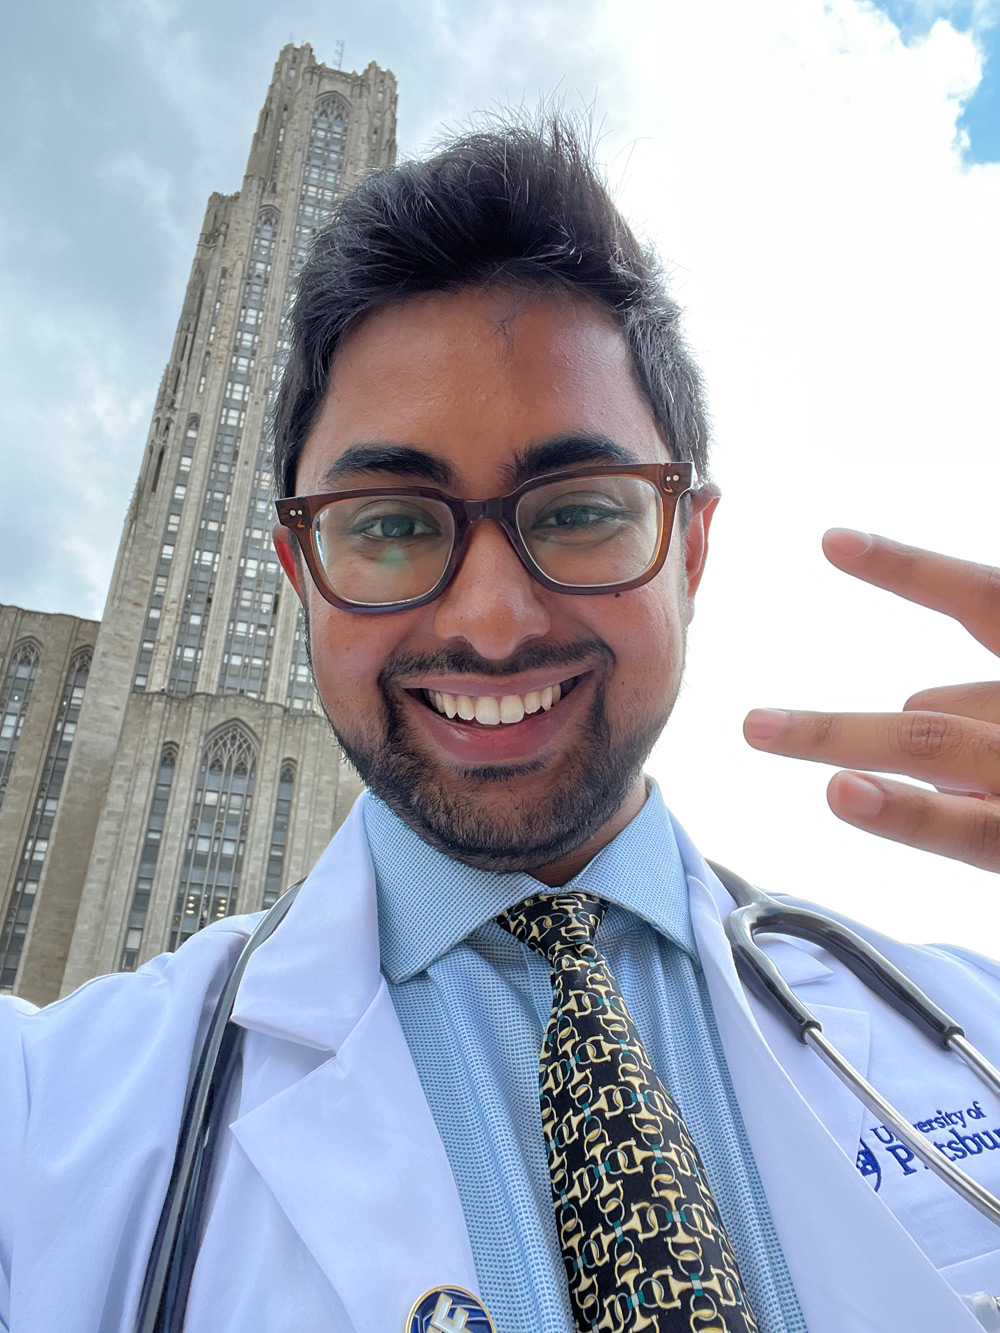 Alum Razeen Khan at the University of Pittsburgh Medical School, wearing his coat and stethoscope, with the Cathedral of Learning in the background.